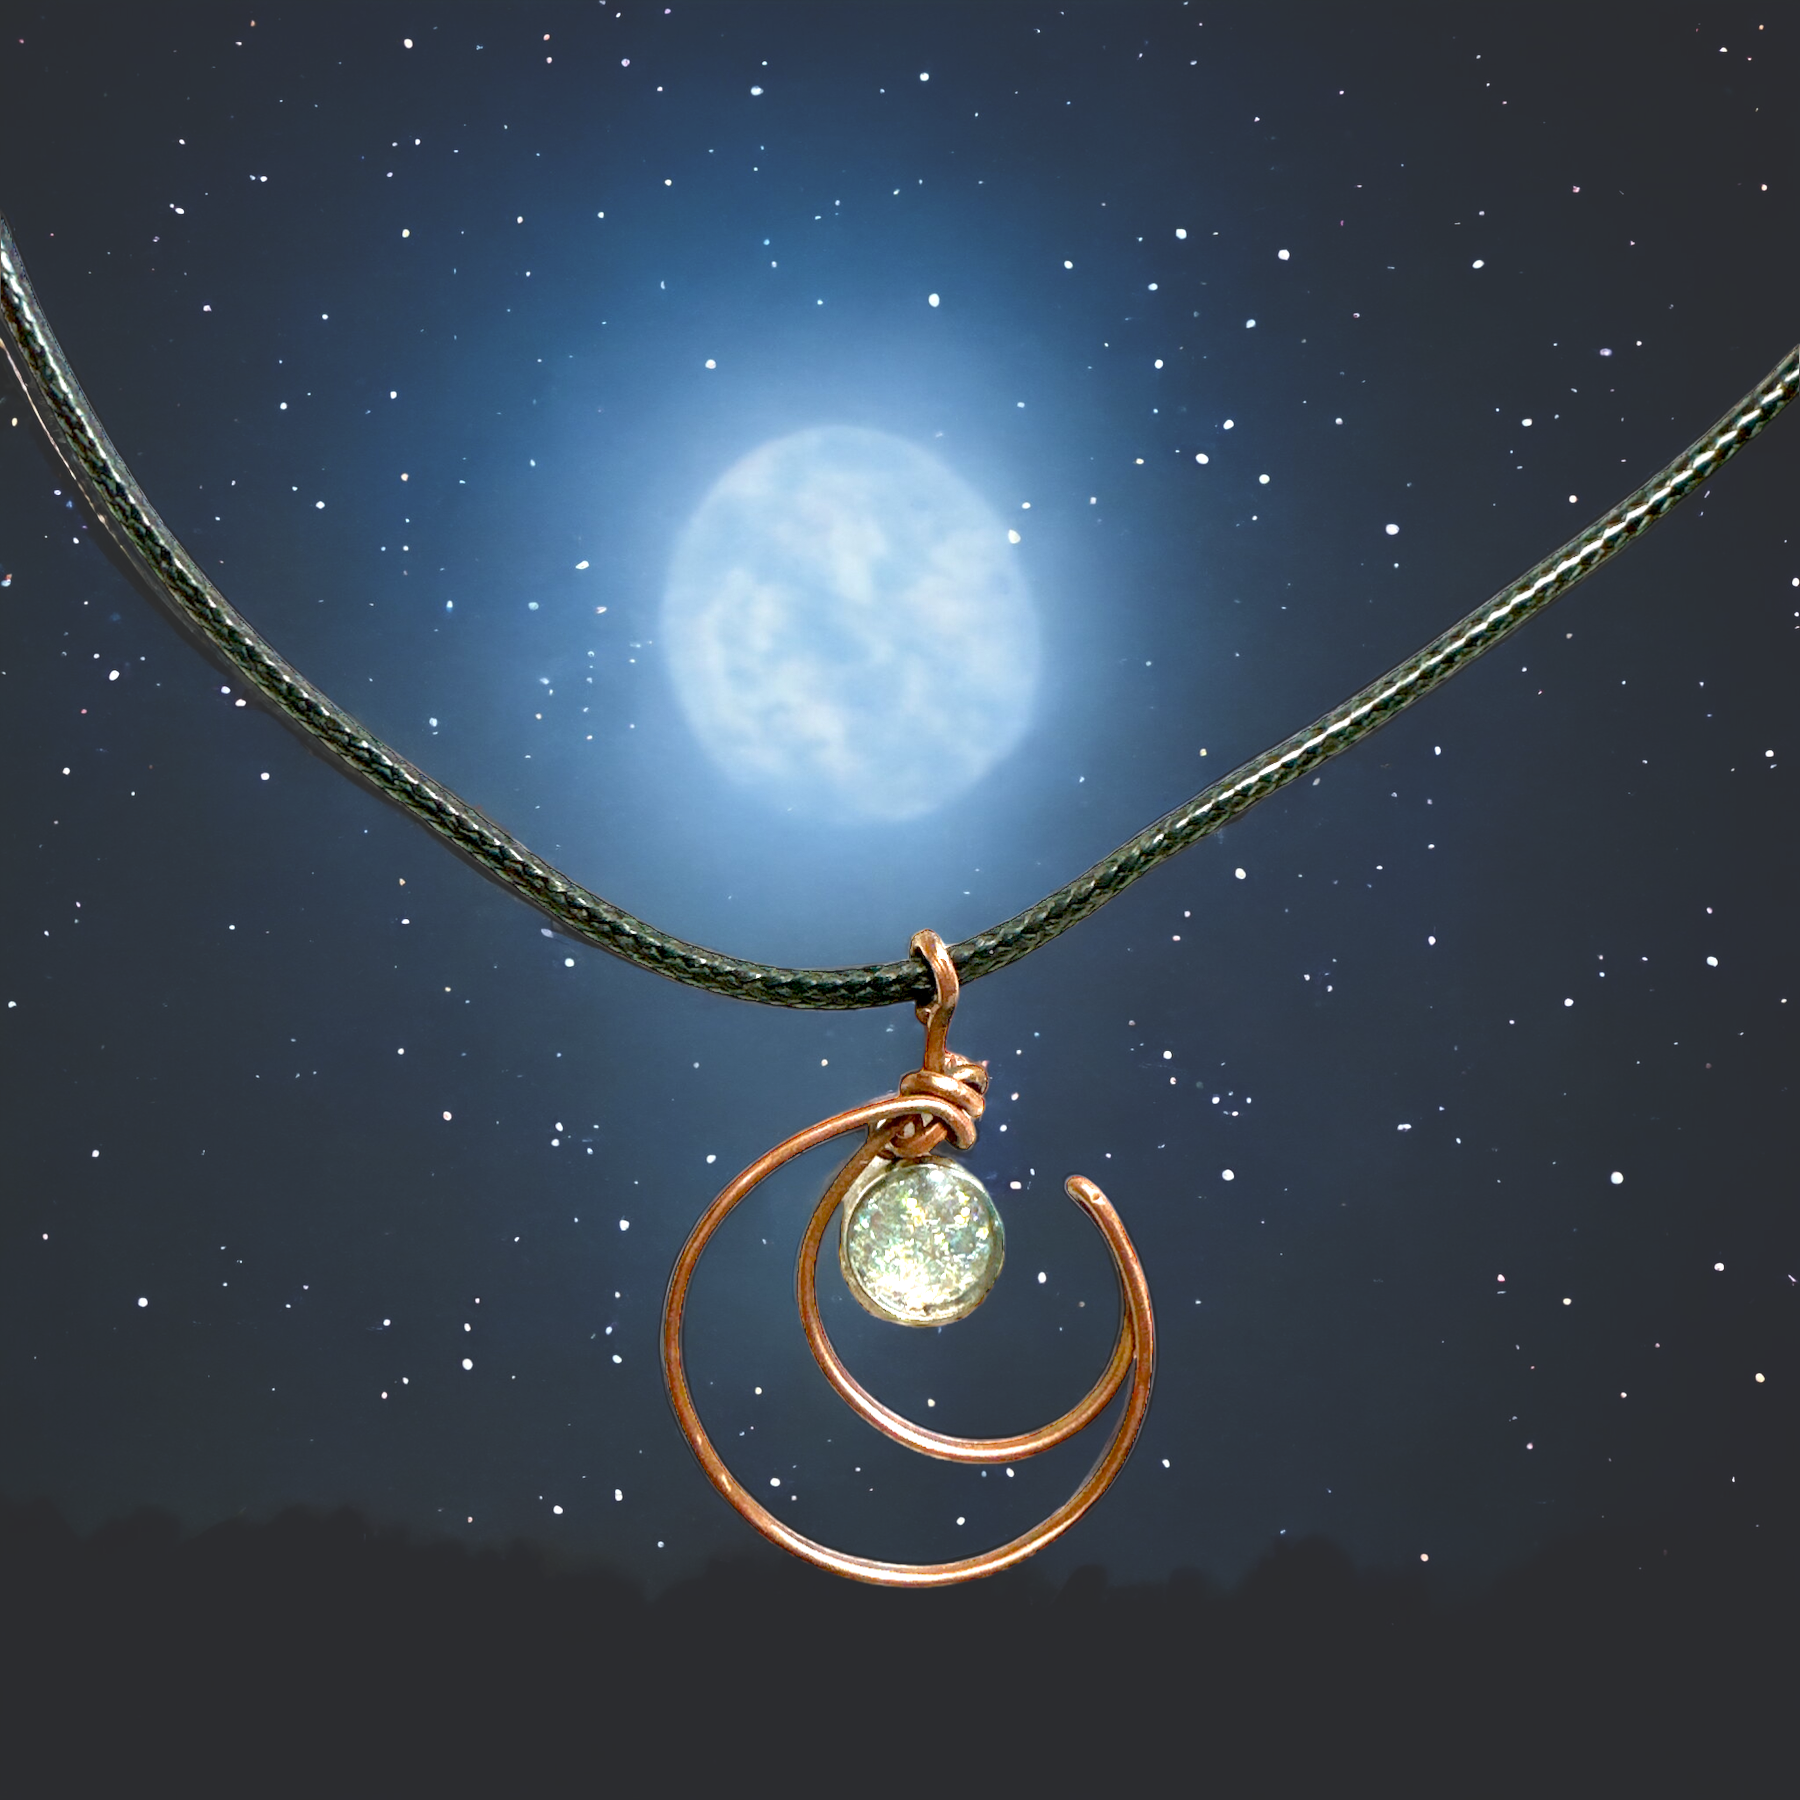 Copper Crescent Moon Necklace. A Shimmering Emblem of Nighttime Beauty